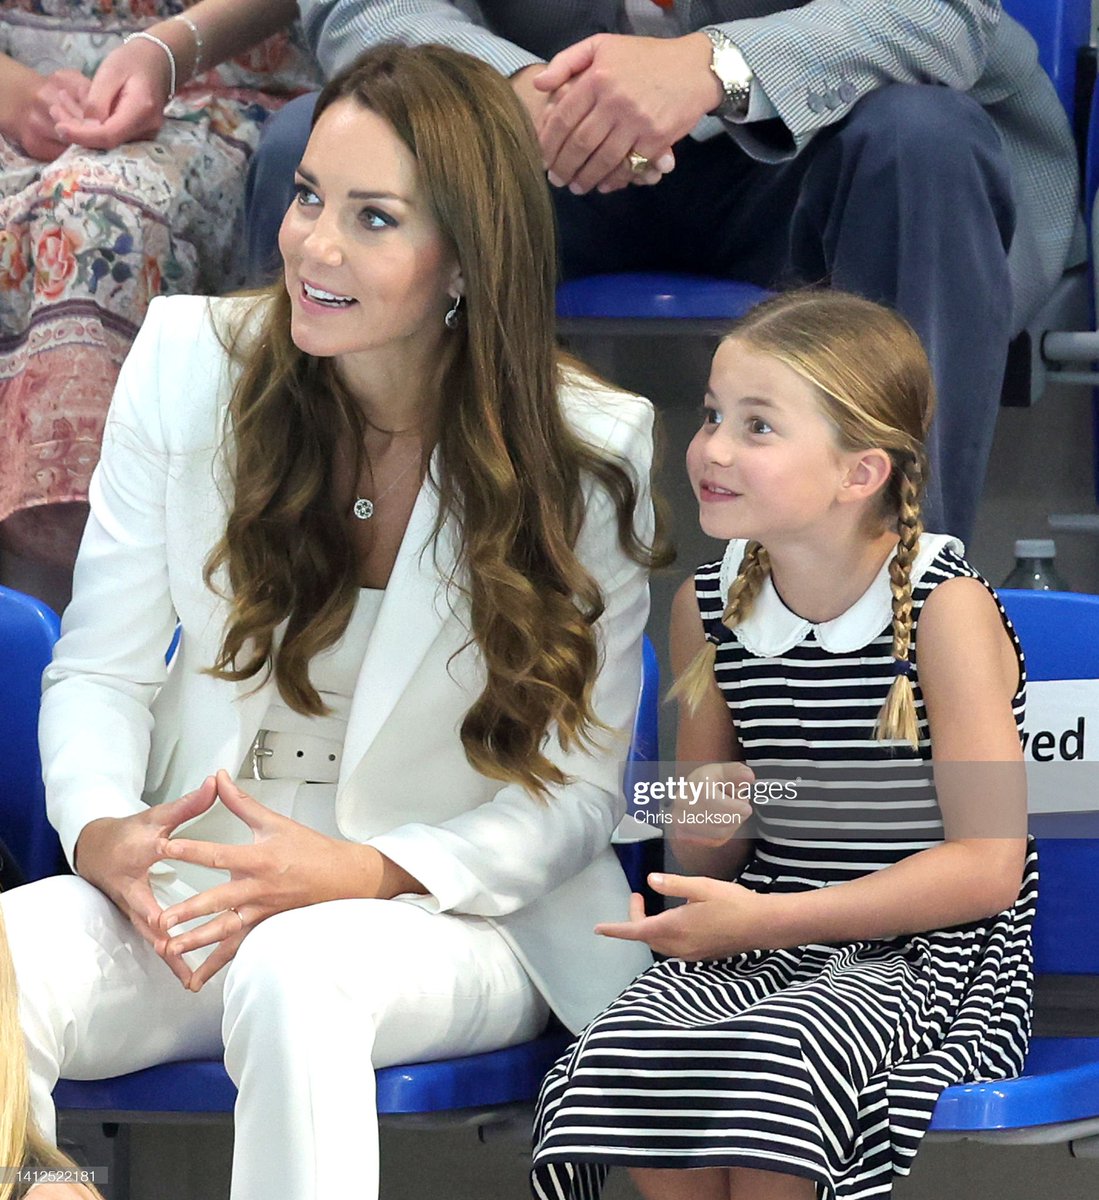 Love this adorable excitement from the Princess of Wales and Princess Charlotte as they  watched the Swimming at the Birmingham 2022 Commonwealth Games! 😍🤍🥰

#PrincessofWales #CatherinePrincessofWales #KateMiddleton #PrincessCharlotte #RoyalFamily #Commonwealthgames2022